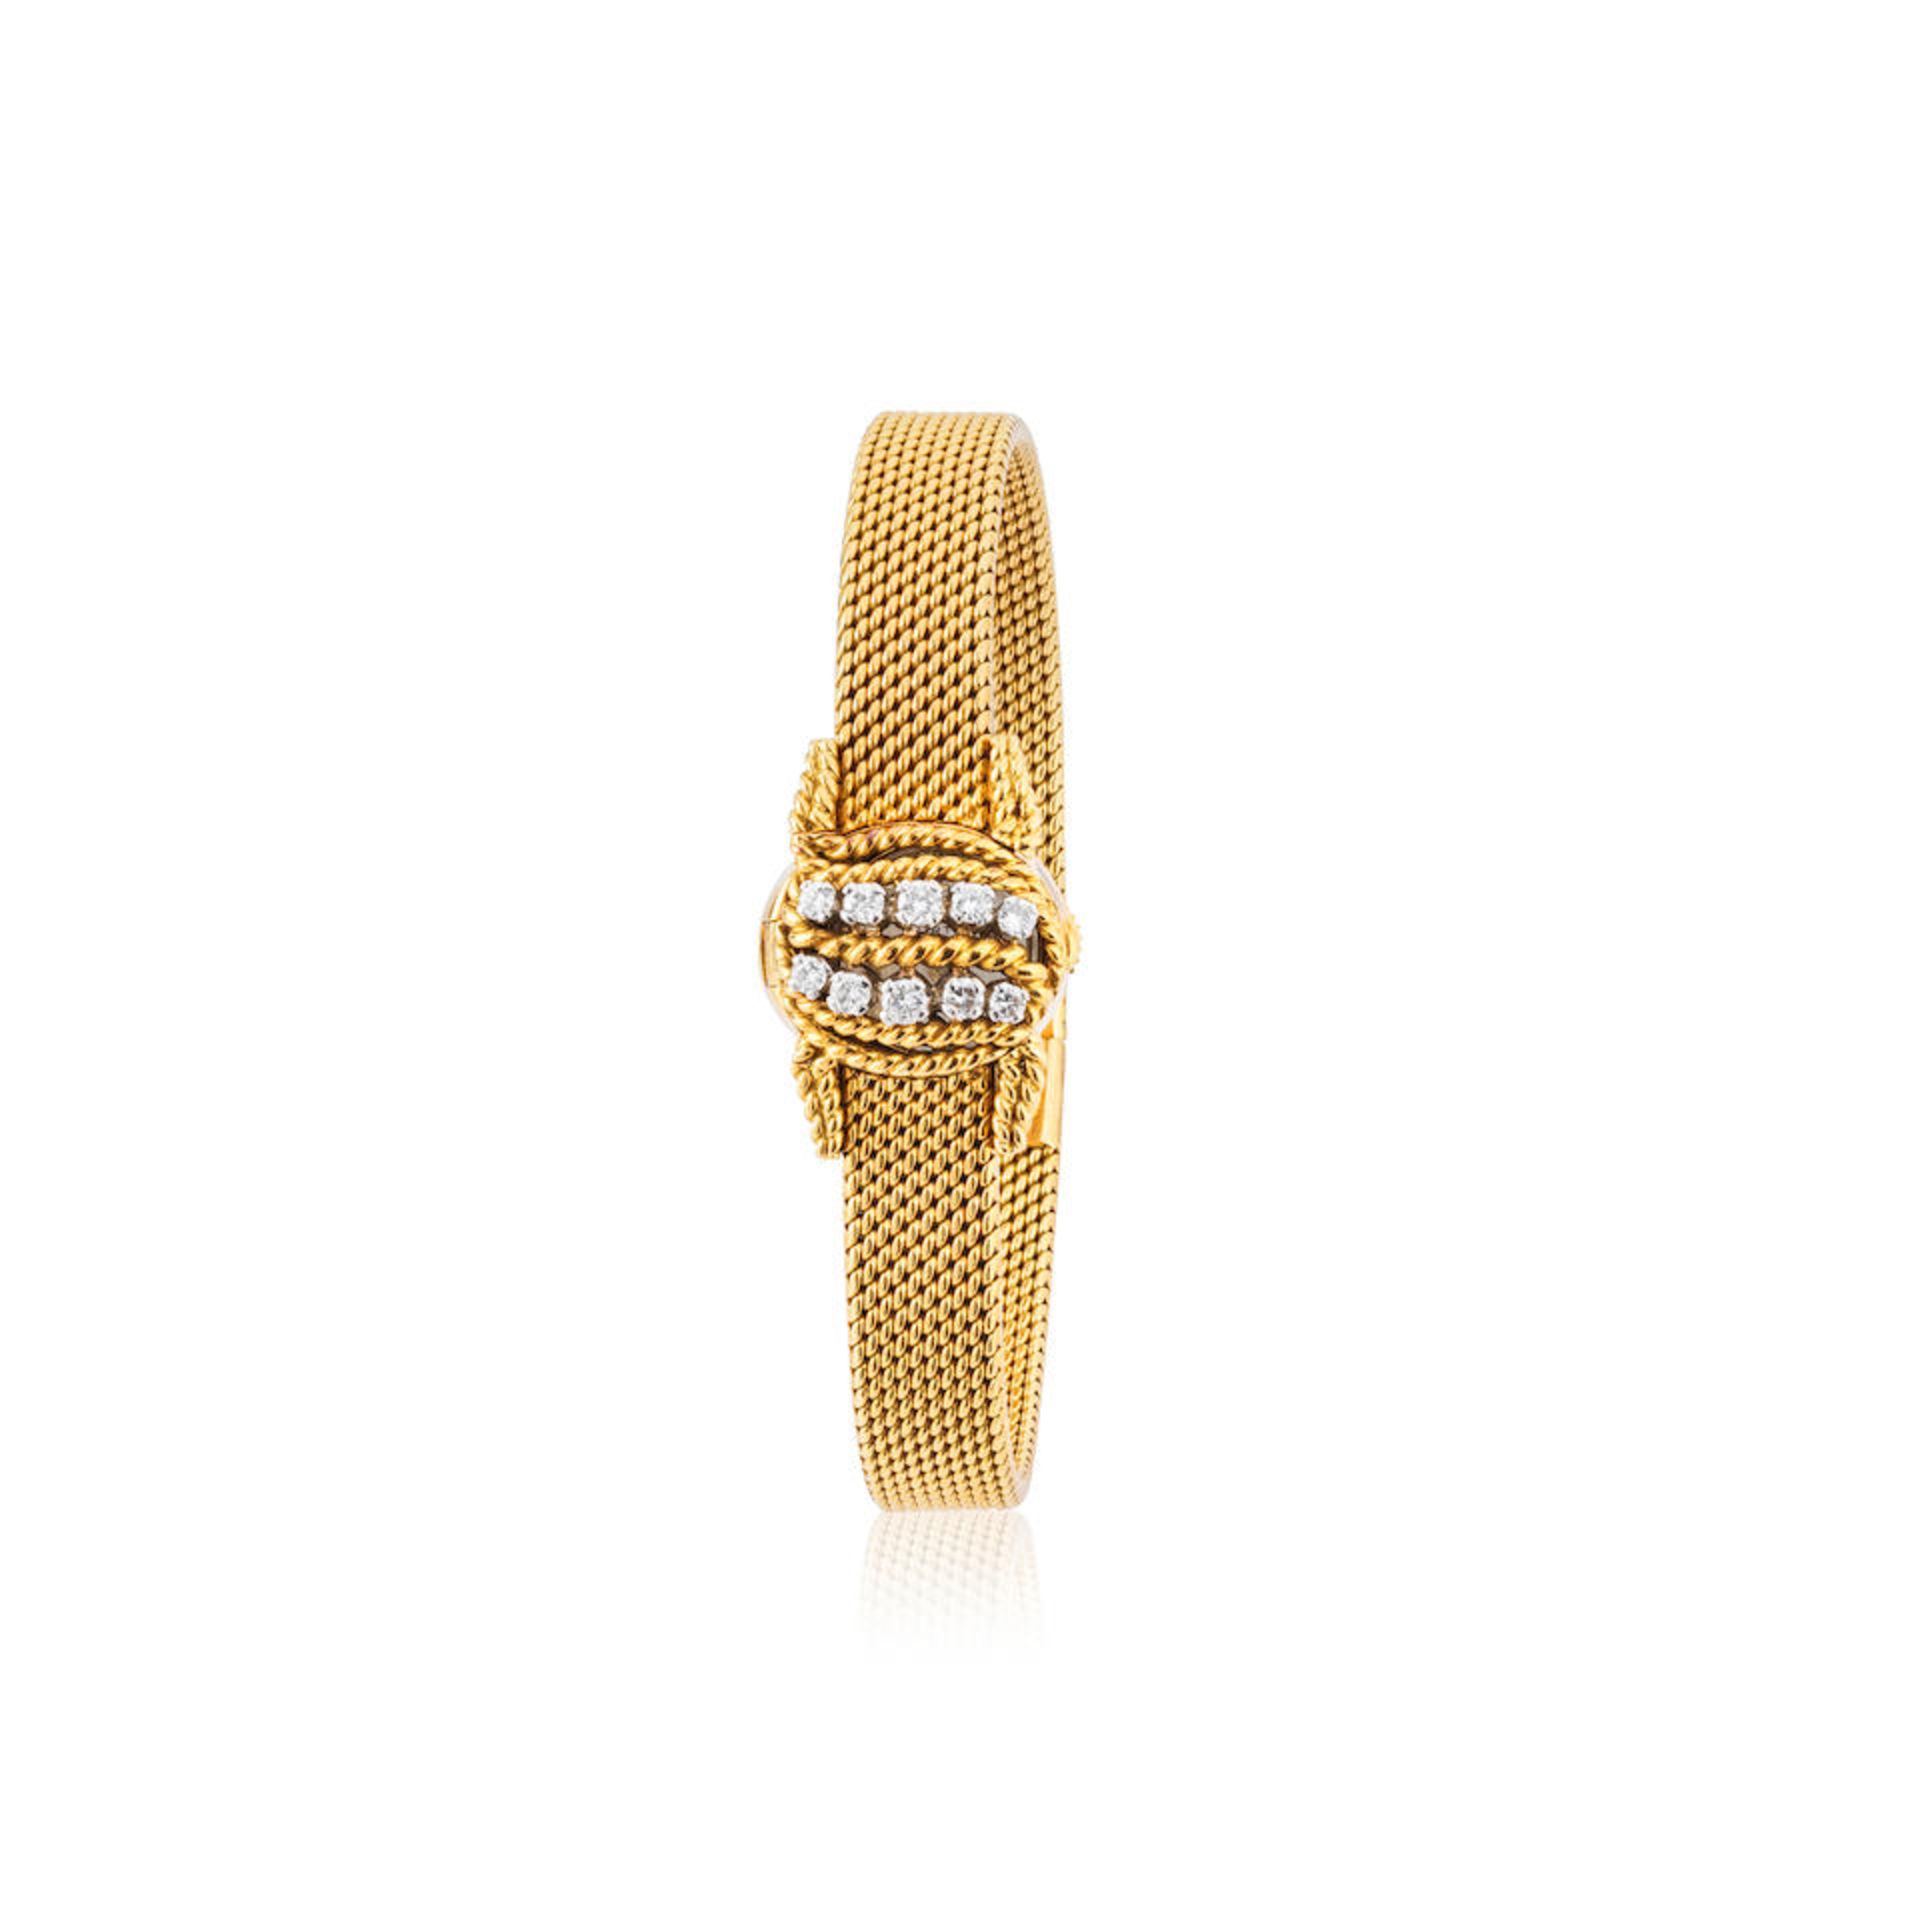 Cartier. A fine lady's 18K gold manual wind bracelet watch with diamond set and concealed dial C...